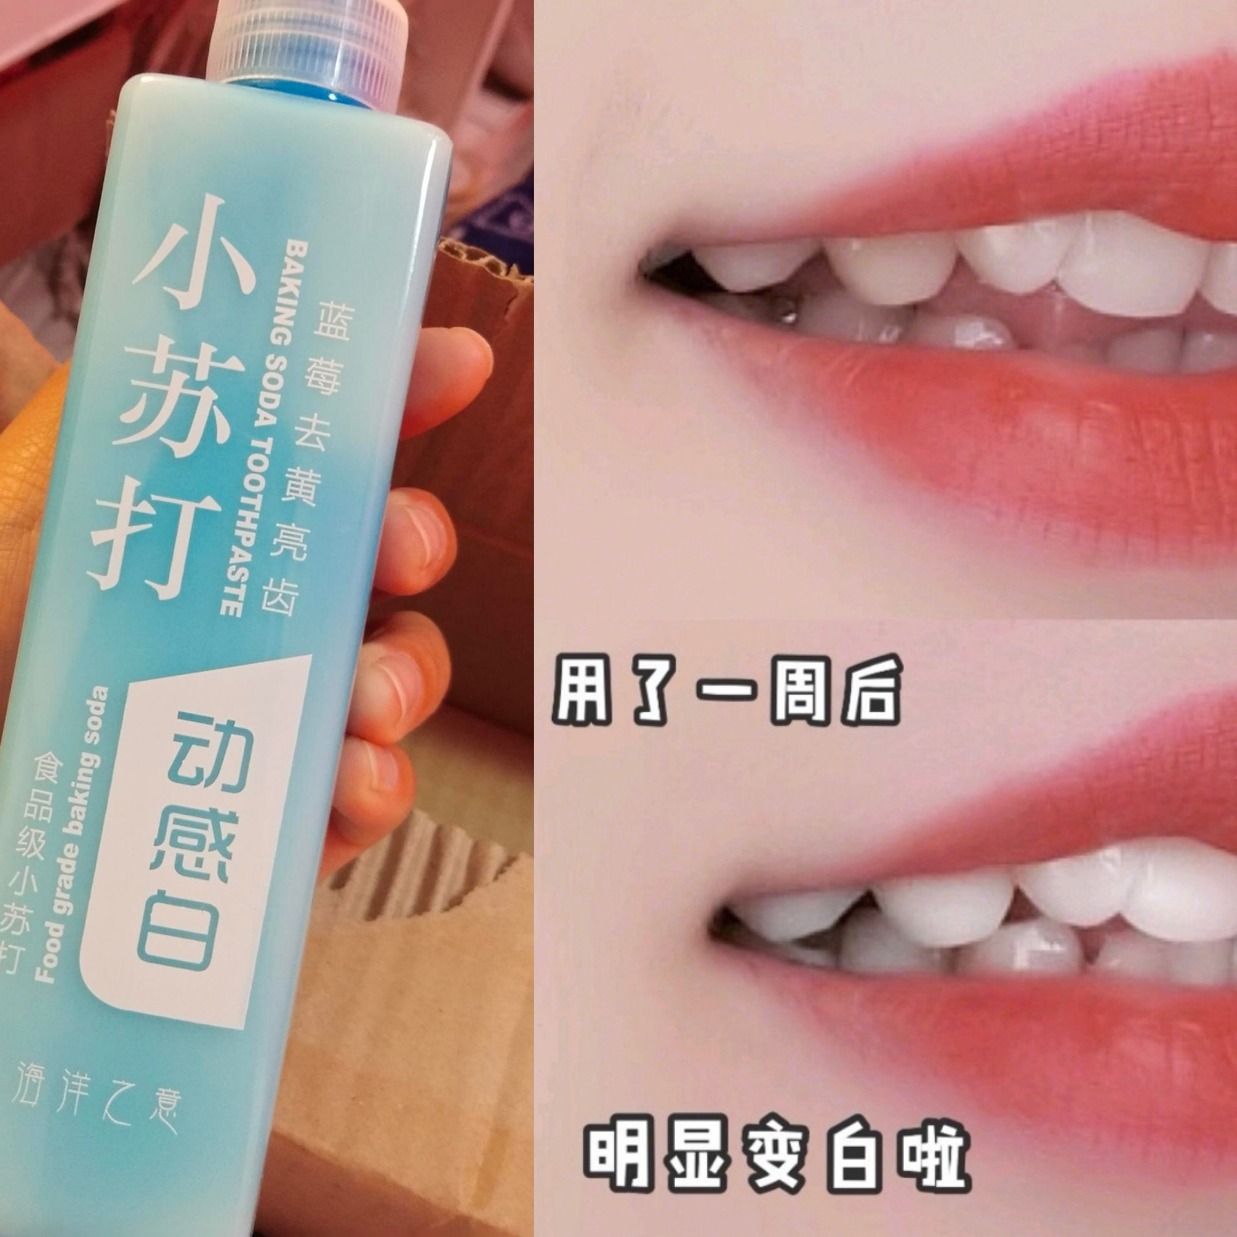 Press type sodium bicarbonate toothpaste whitening and removing the odor of yellow mouth